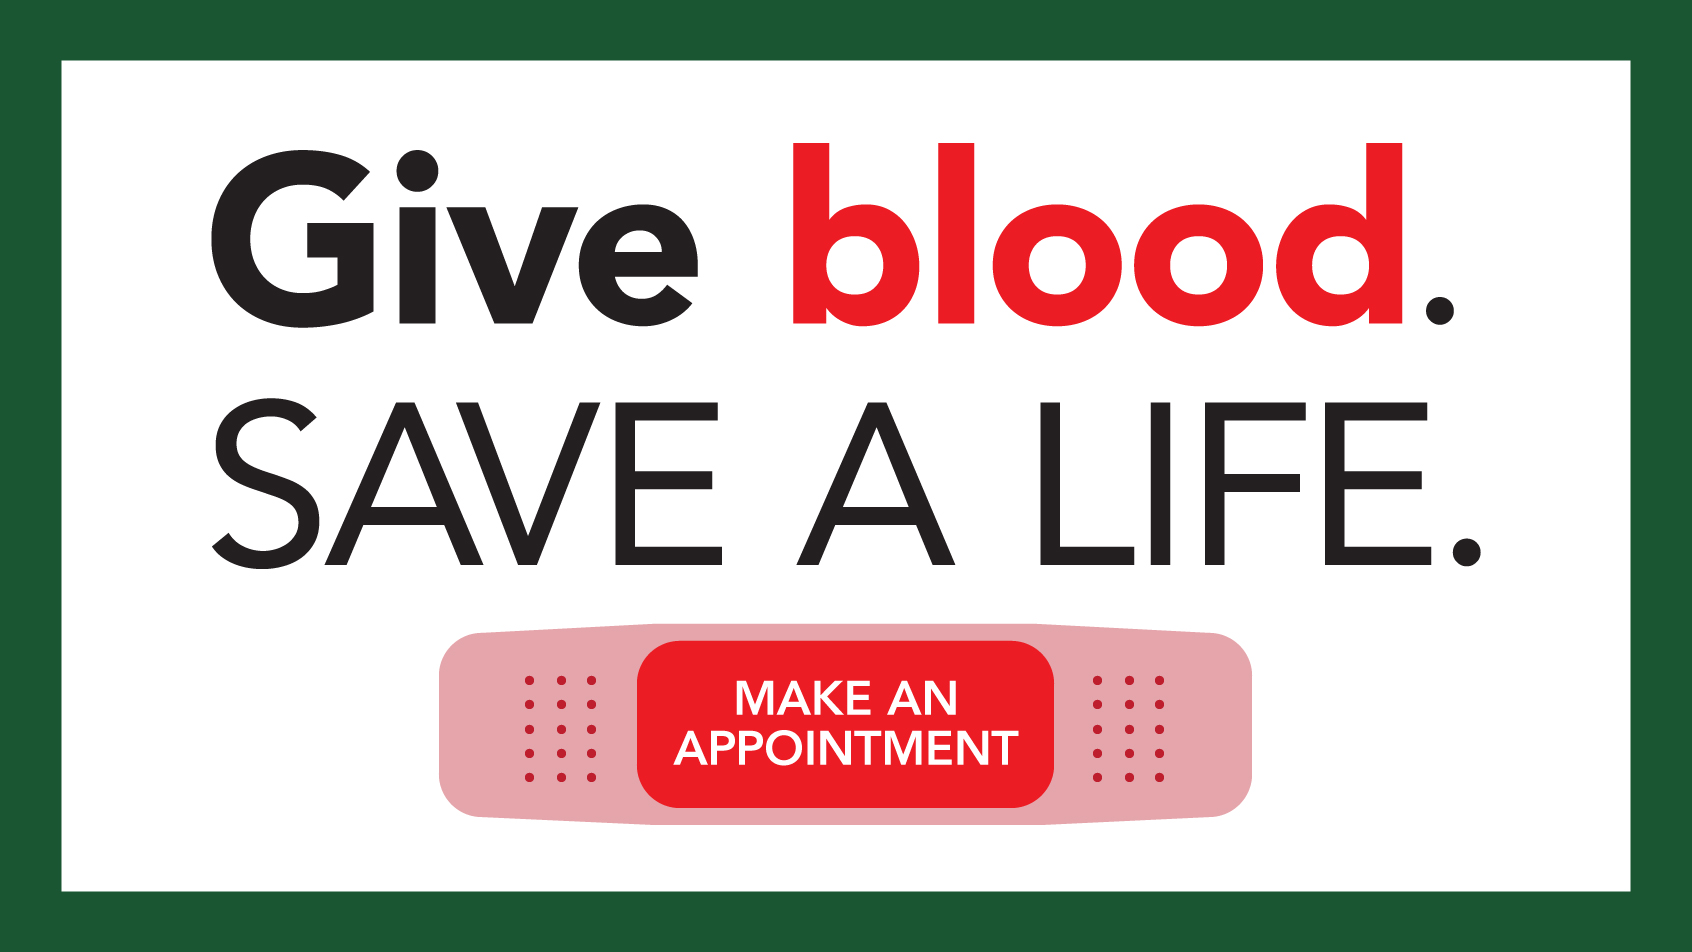 Give blood. Save a life. Make an appointment.